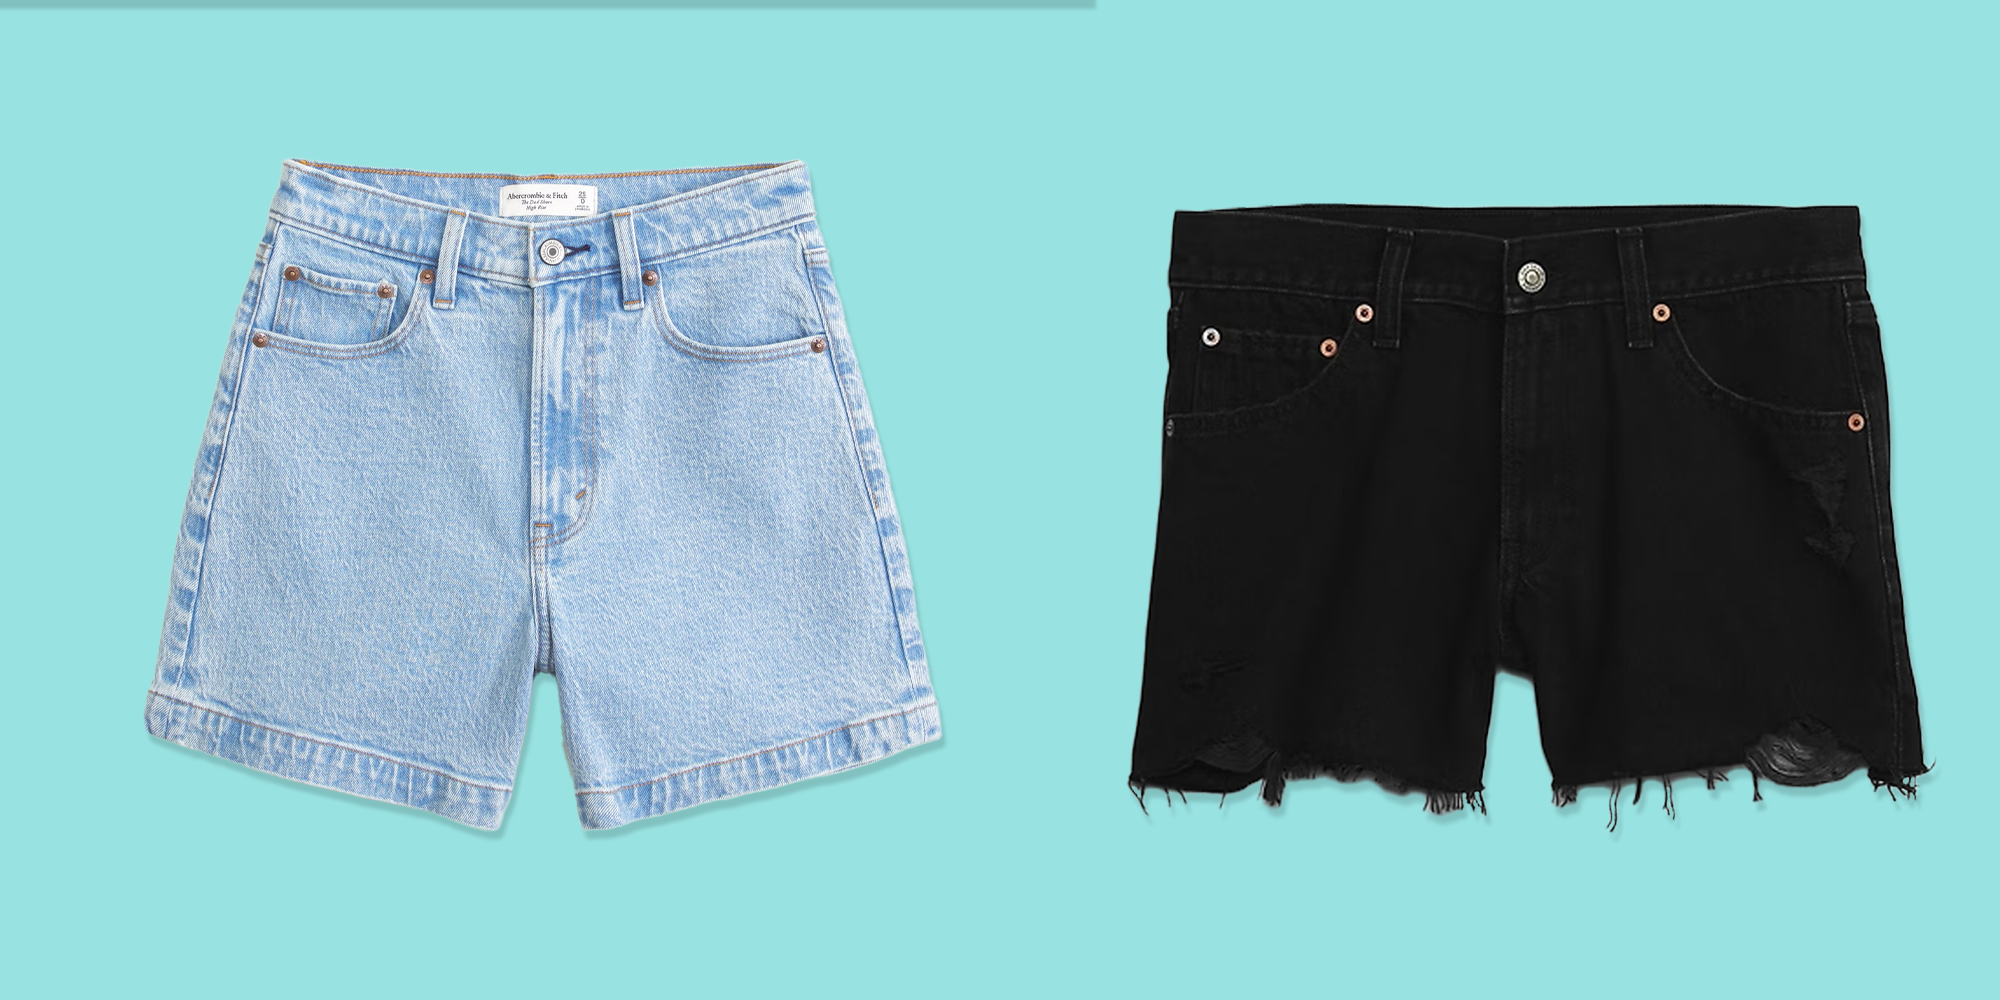 I Tried the So-Called Best Denim Shorts and Ranked These 5 Highest